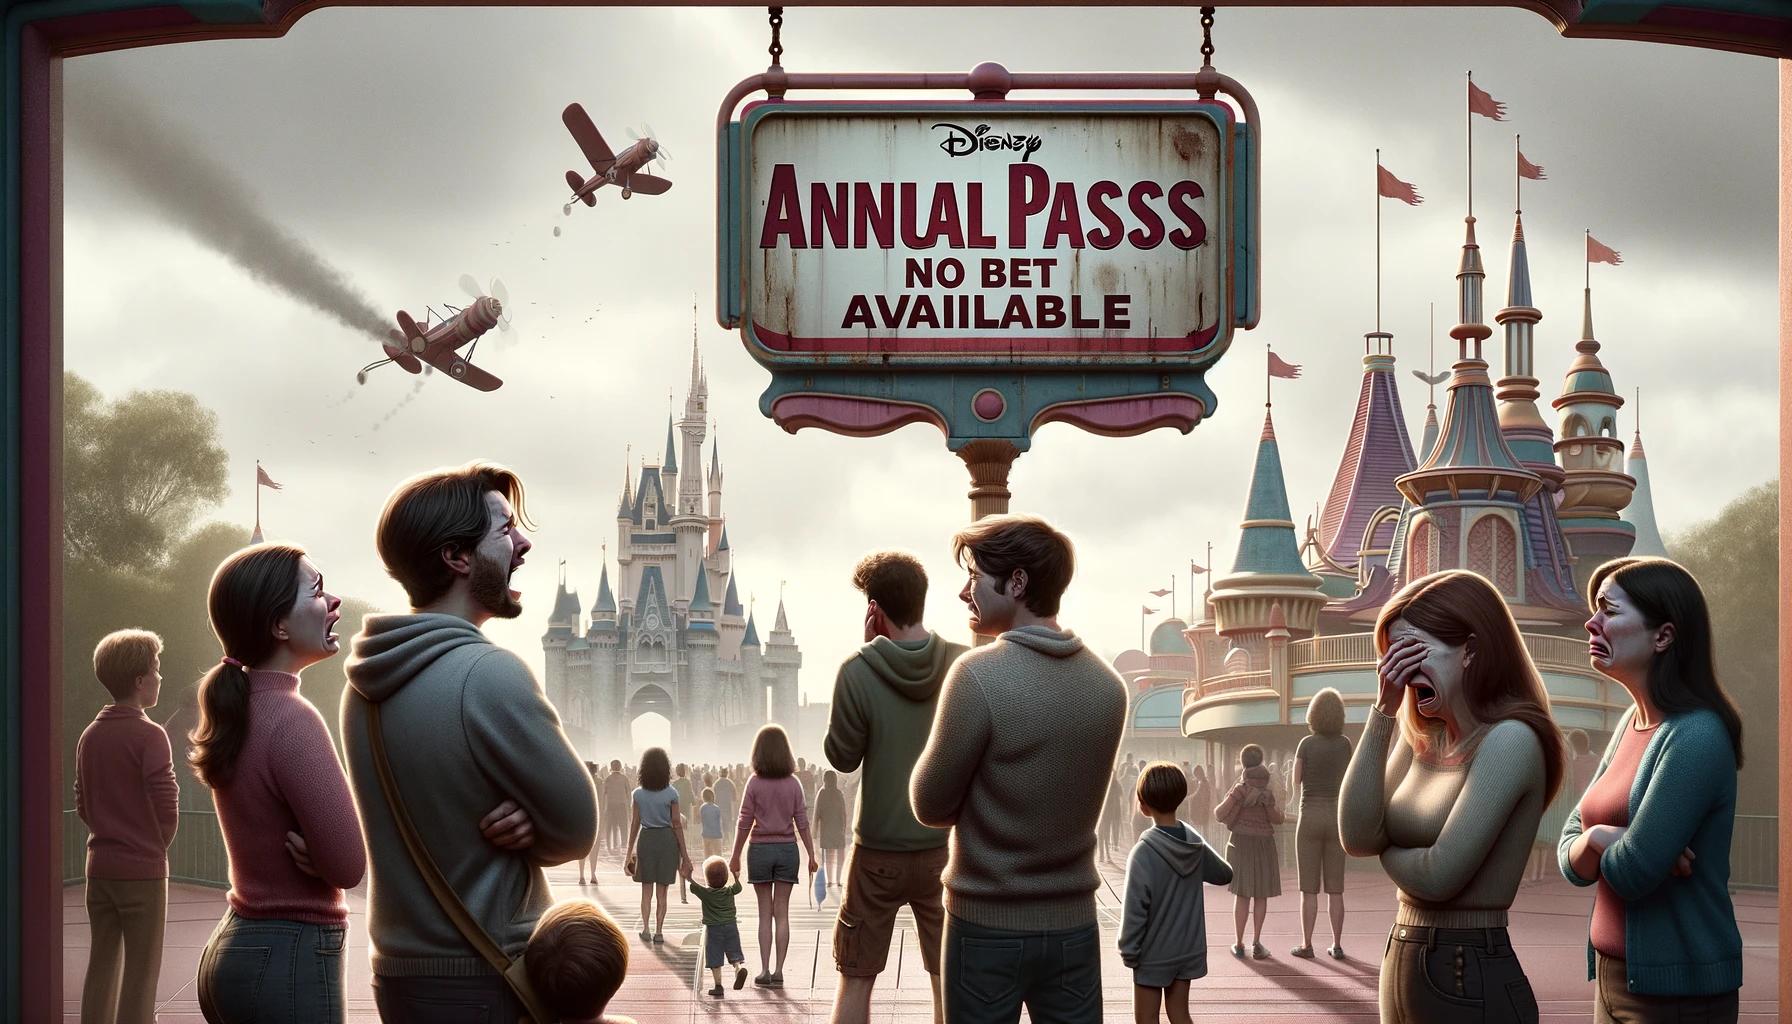 A scene at a Disney theme park depicting the disappointment due to the discontinuation of annual passes. The image shows a diverse group of visitors, including a couple and two children, visibly upset as they read a large announcement board stating 'Annual Passes No Longer Available'. The background features iconic Disney park attractions looking deserted and neglected, enhancing the mood of disappointment. The sky is grey, adding to the somber atmosphere. Focus on the emotional expressions of the visitors.